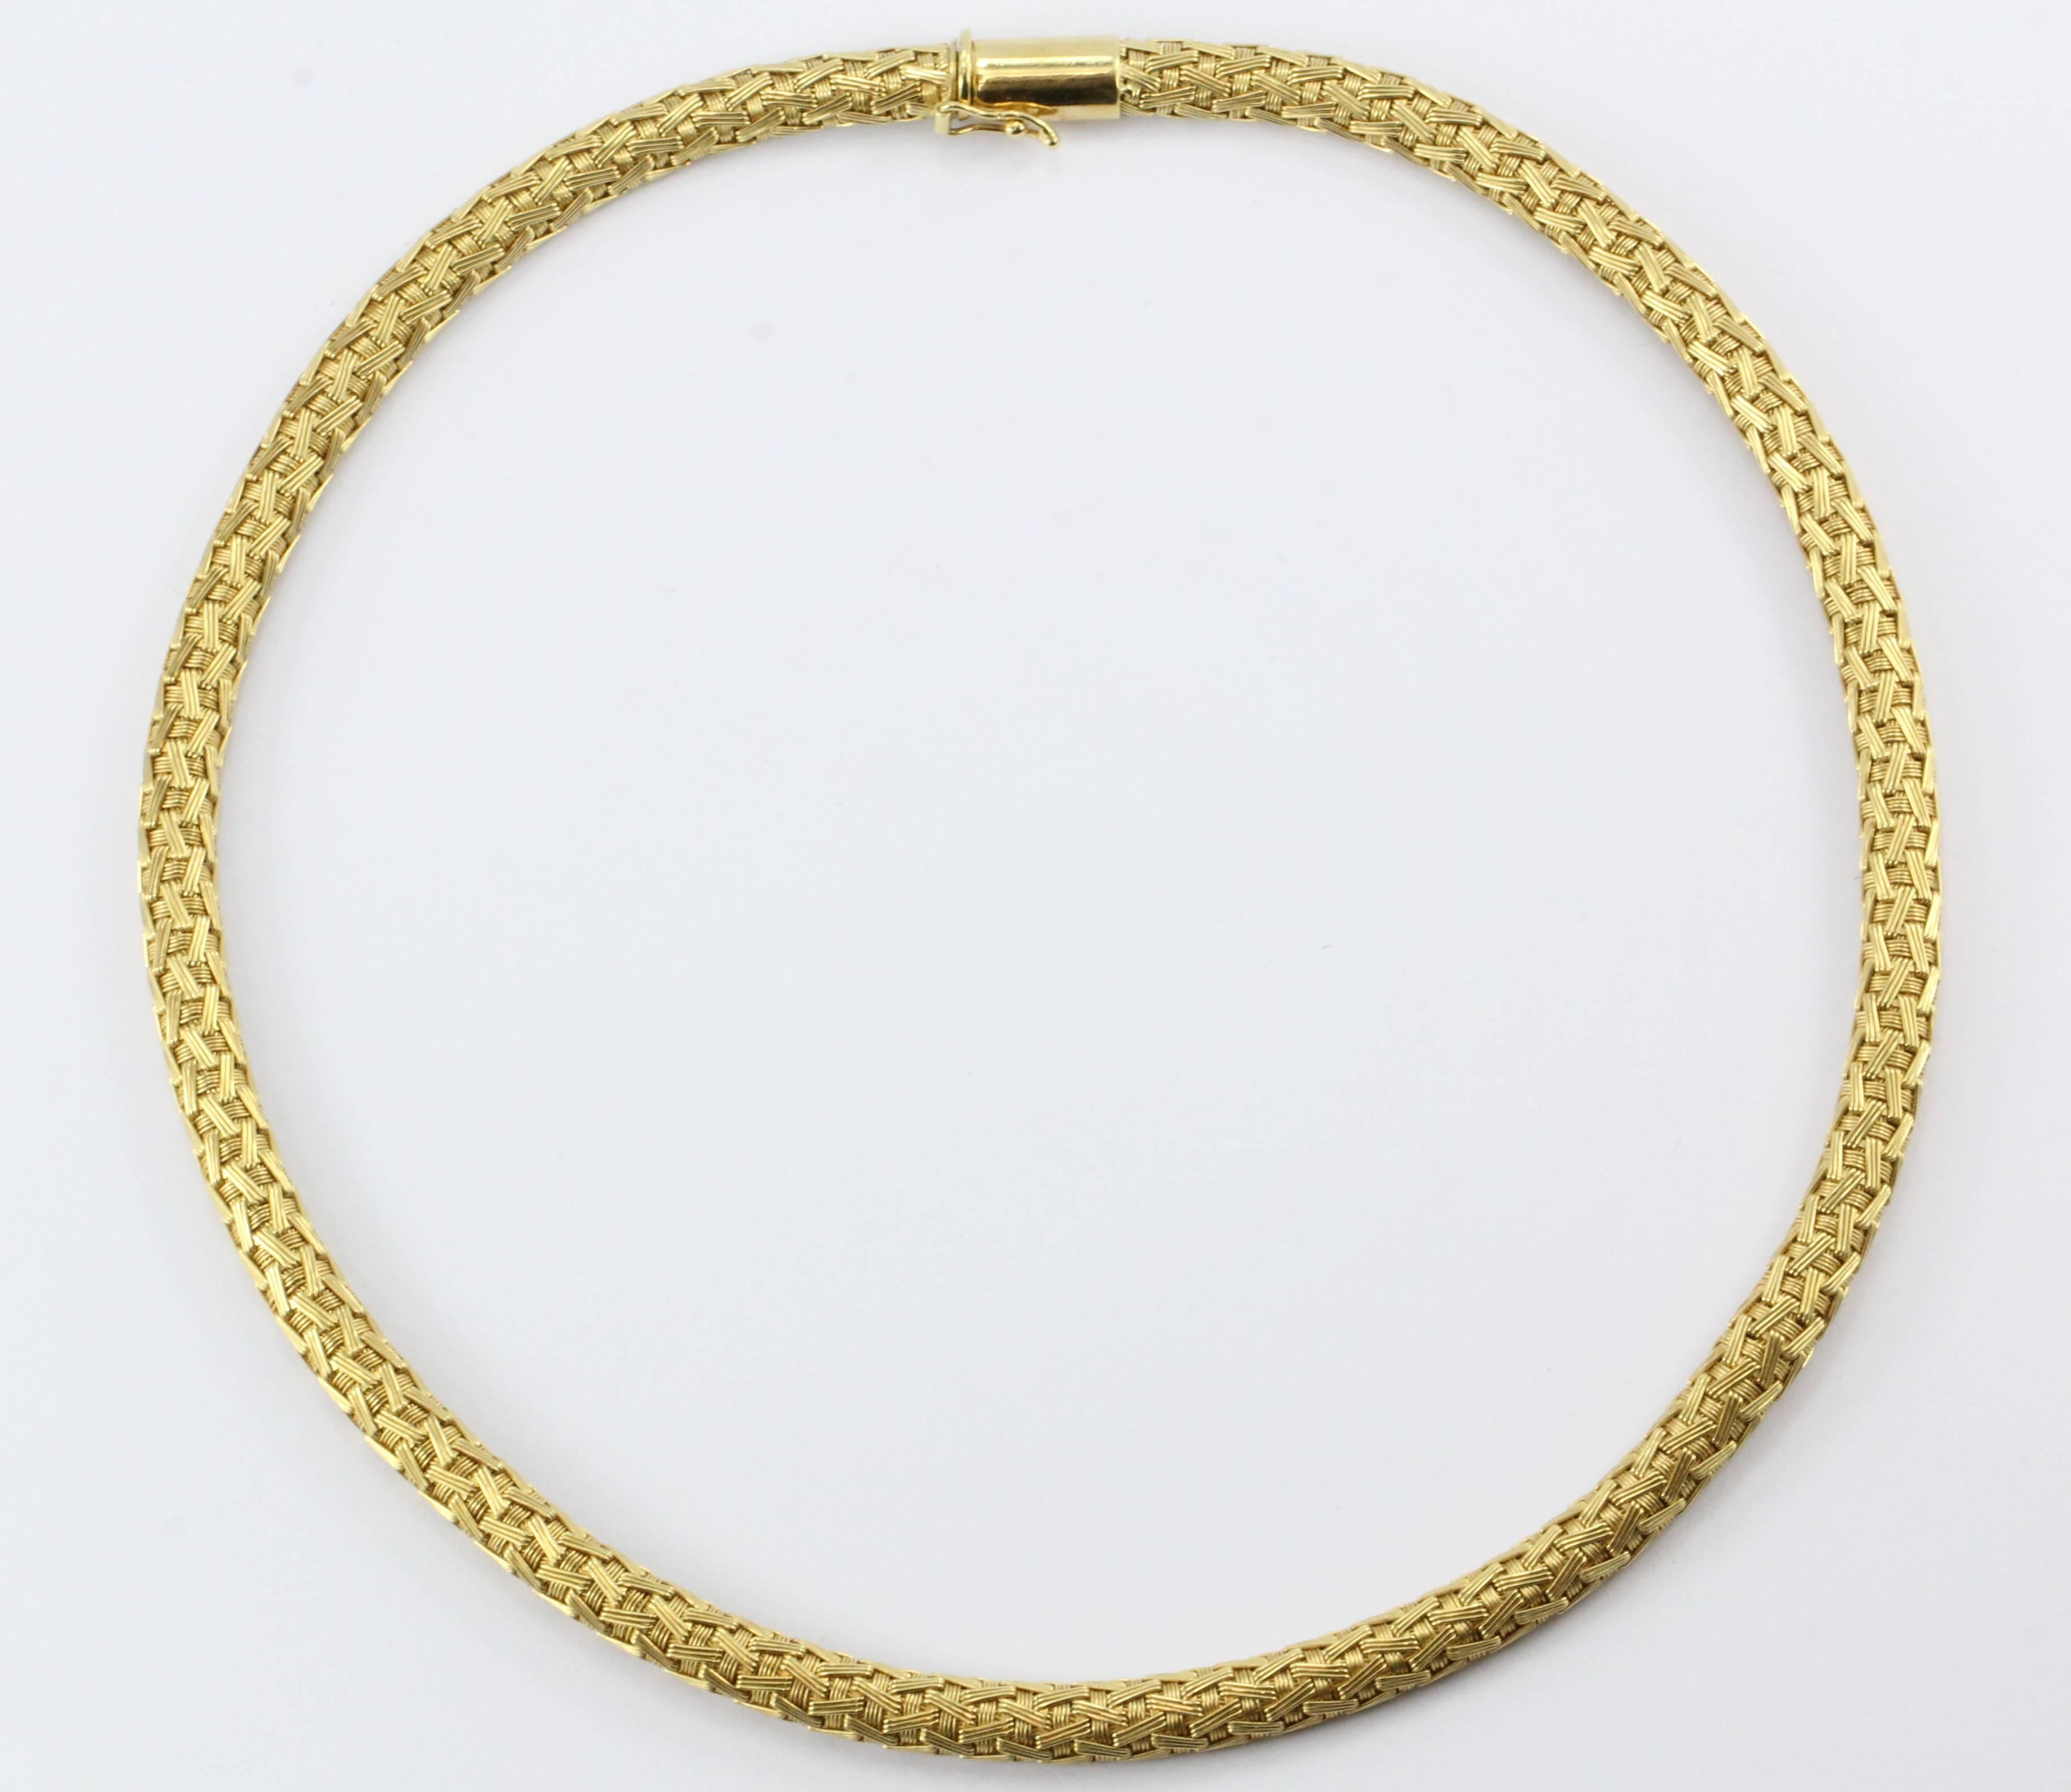 Vintage Roberto Coin 18K Gold Woven Silk Necklace. The necklace is in excellent estate condition and ready to wear. It is signed 